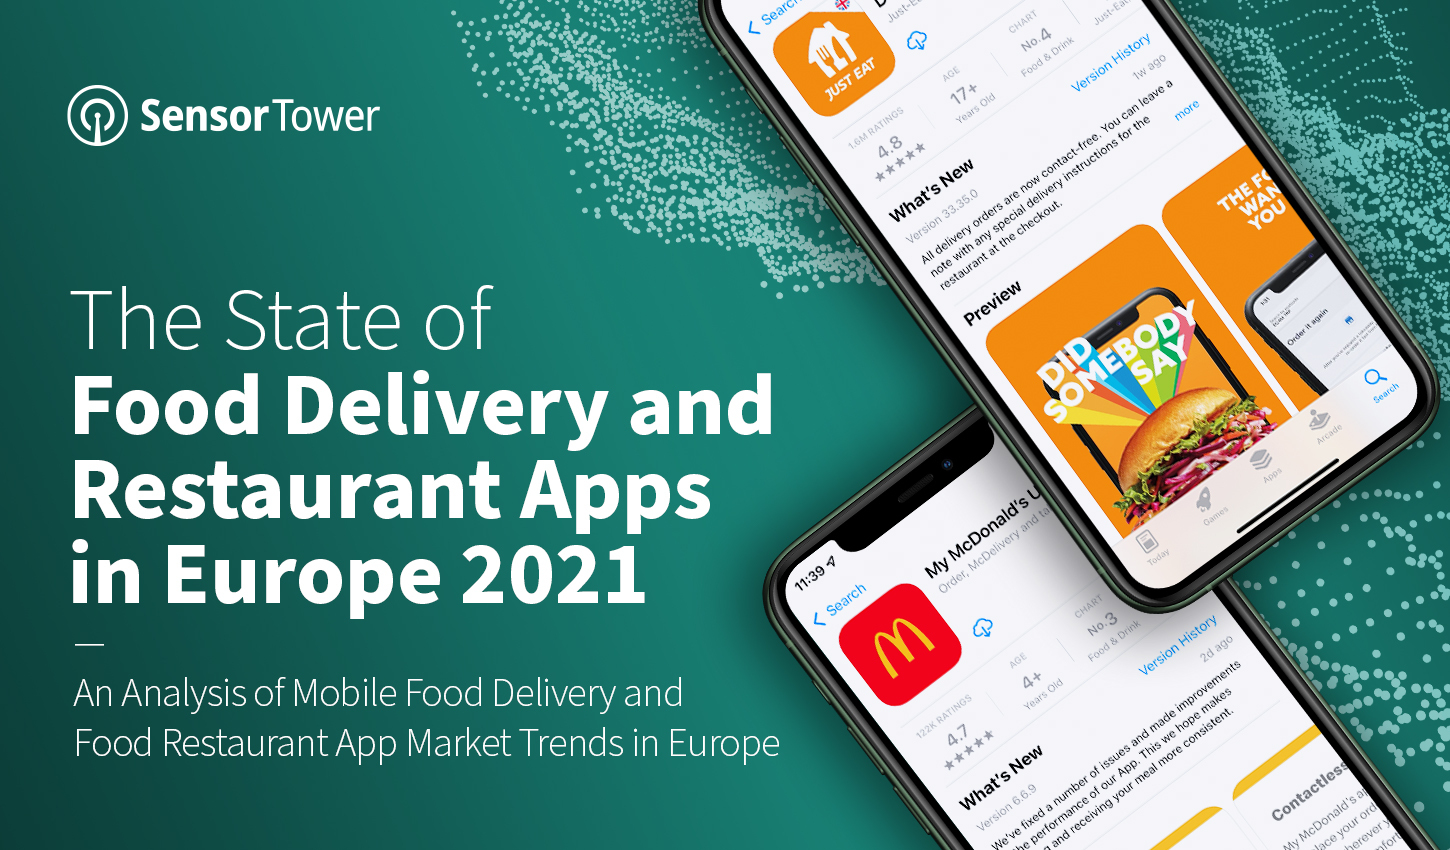 Takeaways from Sensor Tower's State of Food Delivery and Restaurant Apps in Europe 2021